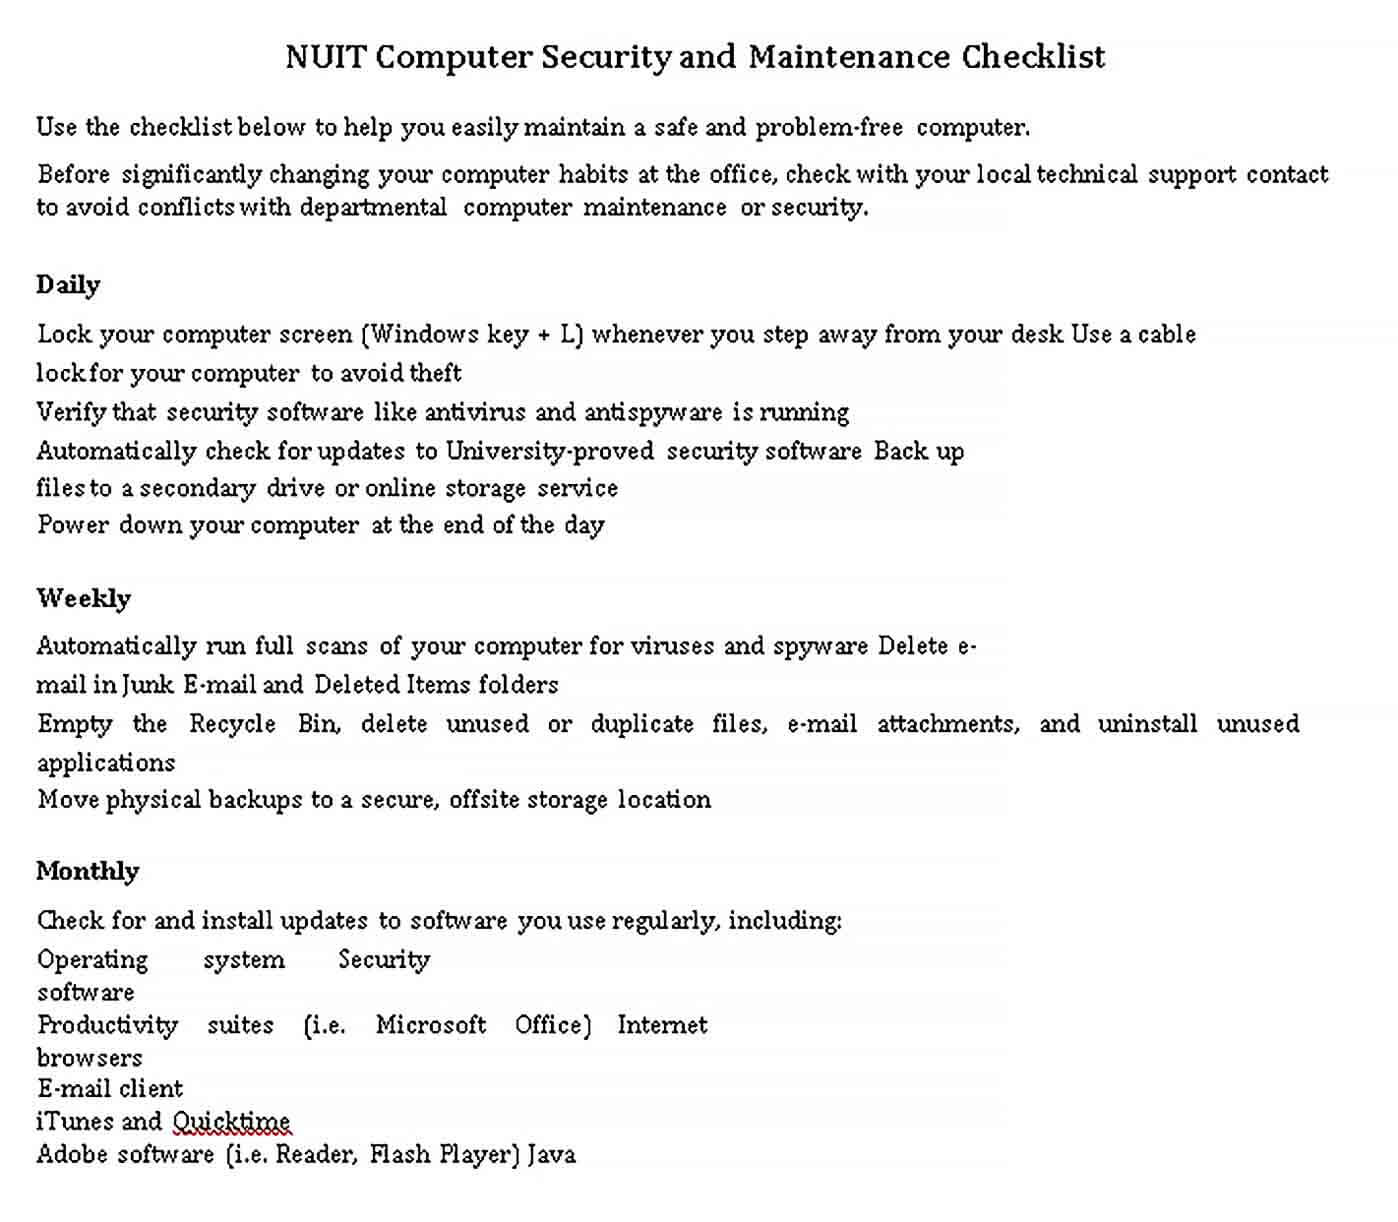 Sample Computer Security and Maintenance Checklist Example